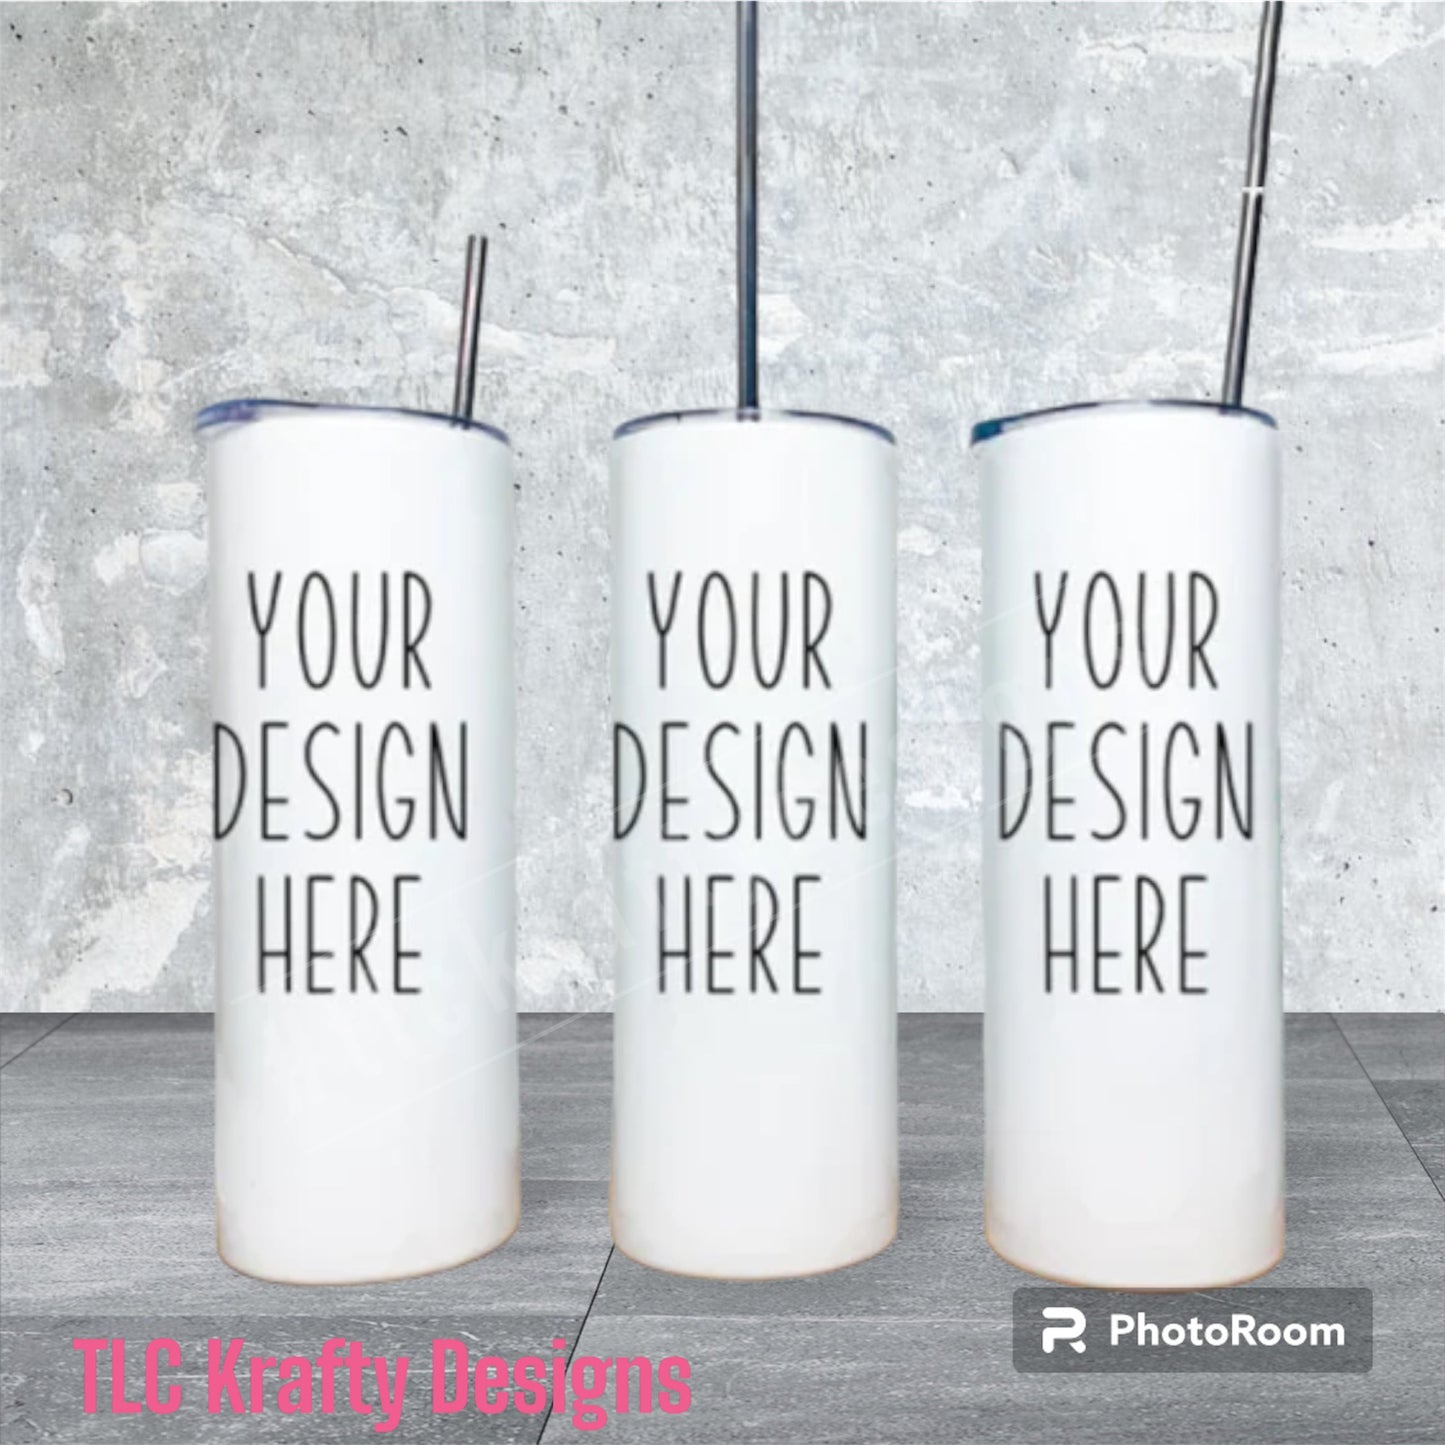 Personalize "Your Design Here" Sublimation 20oz. Tumbler Personalize for Social events, gatherings, Weddings, bachelorette, bachelor and Birthday parties